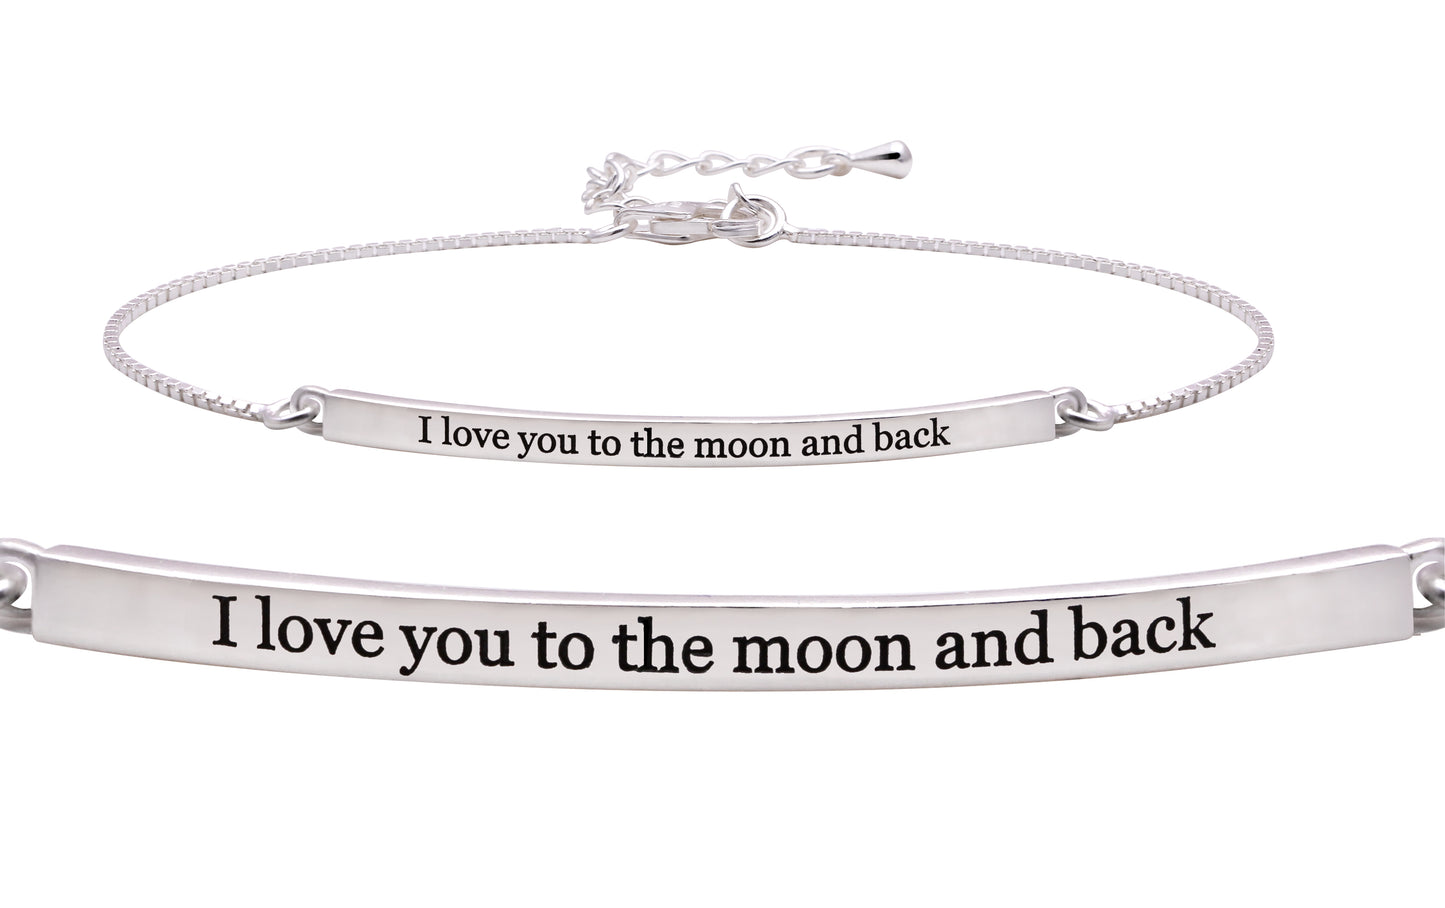 ALOV Jewelry Kettenarmband aus Sterlingsilber mit der Aufschrift „I love you to the Moon and back“.